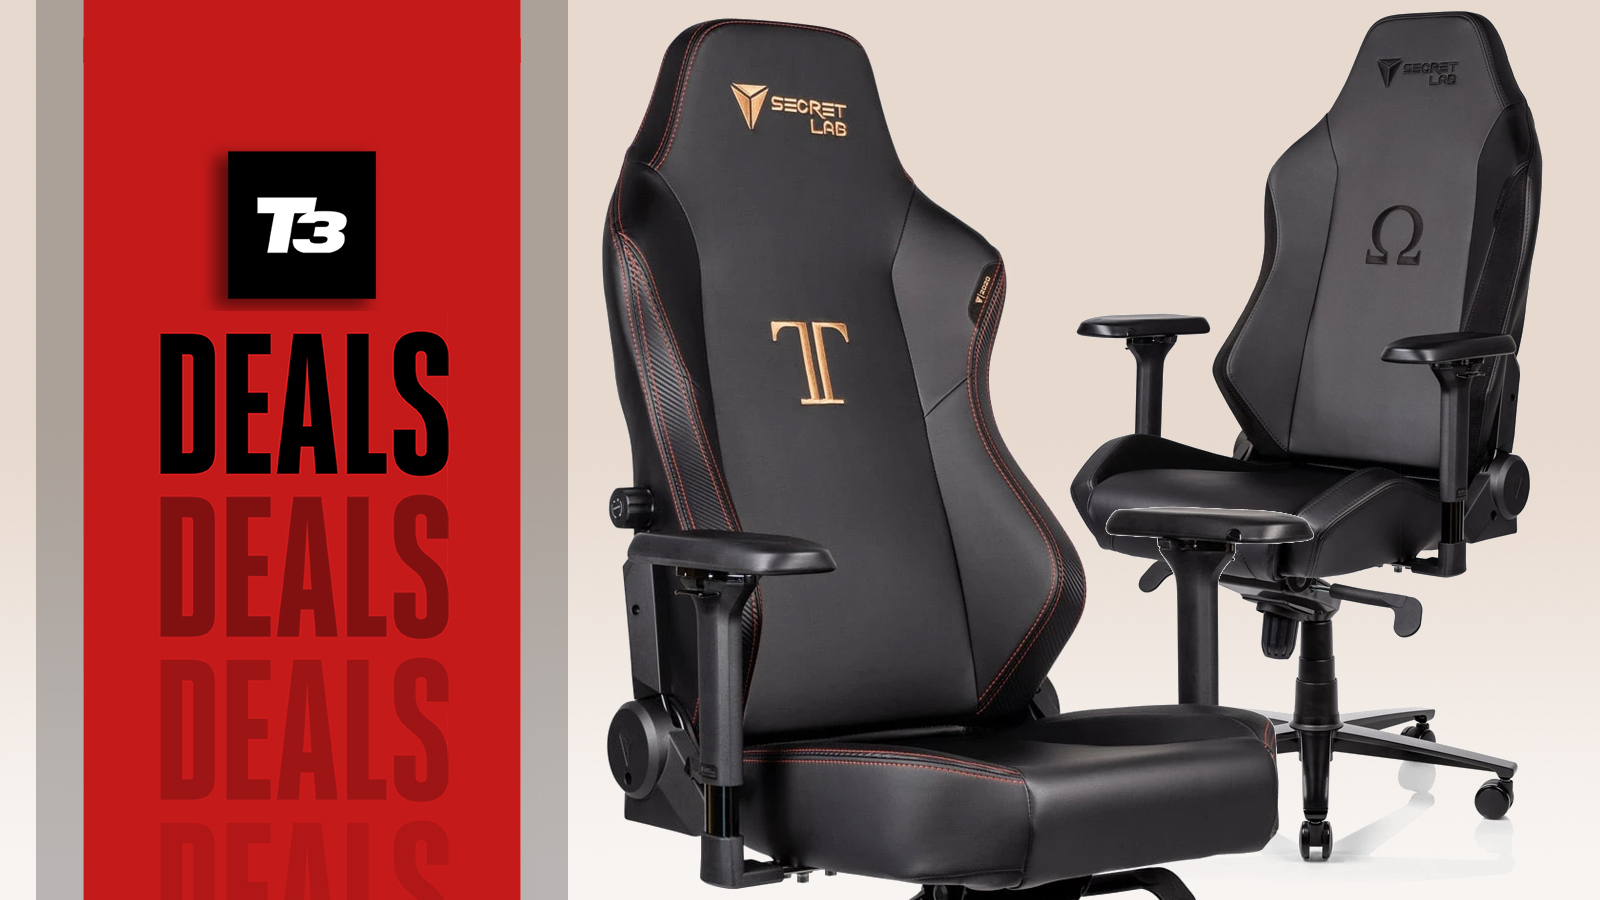 Cheap Gaming Chair Deals At Secret Lab S Stay Home Sale Can Save You Up To 100 T3